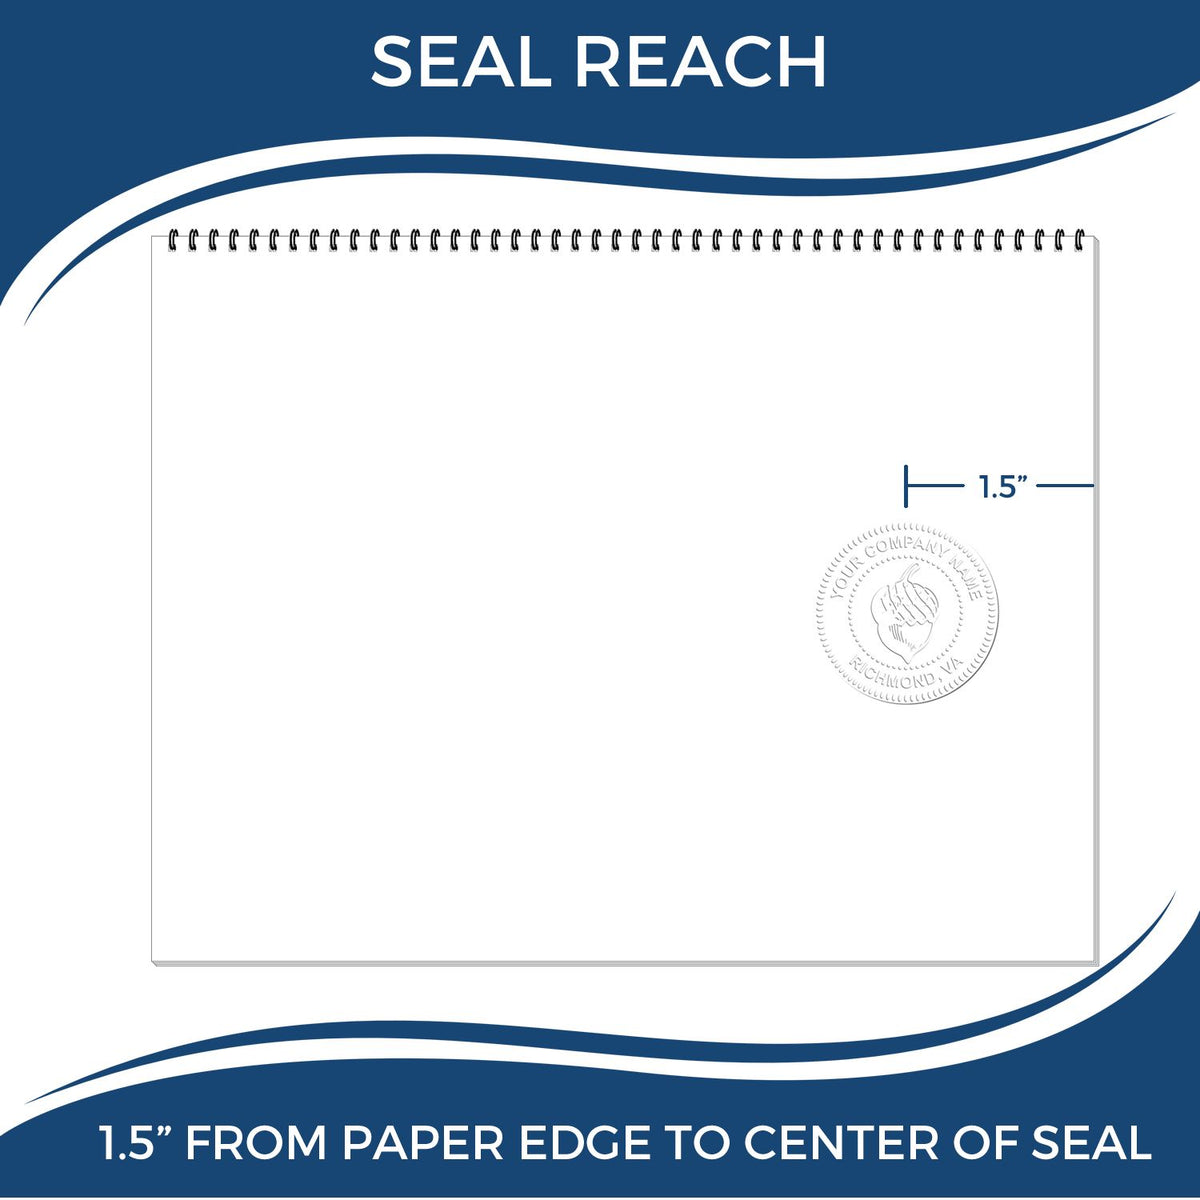 An infographic showing the seal reach which is represented by a ruler and a miniature seal image of the District of Columbia Geologist Desk Seal